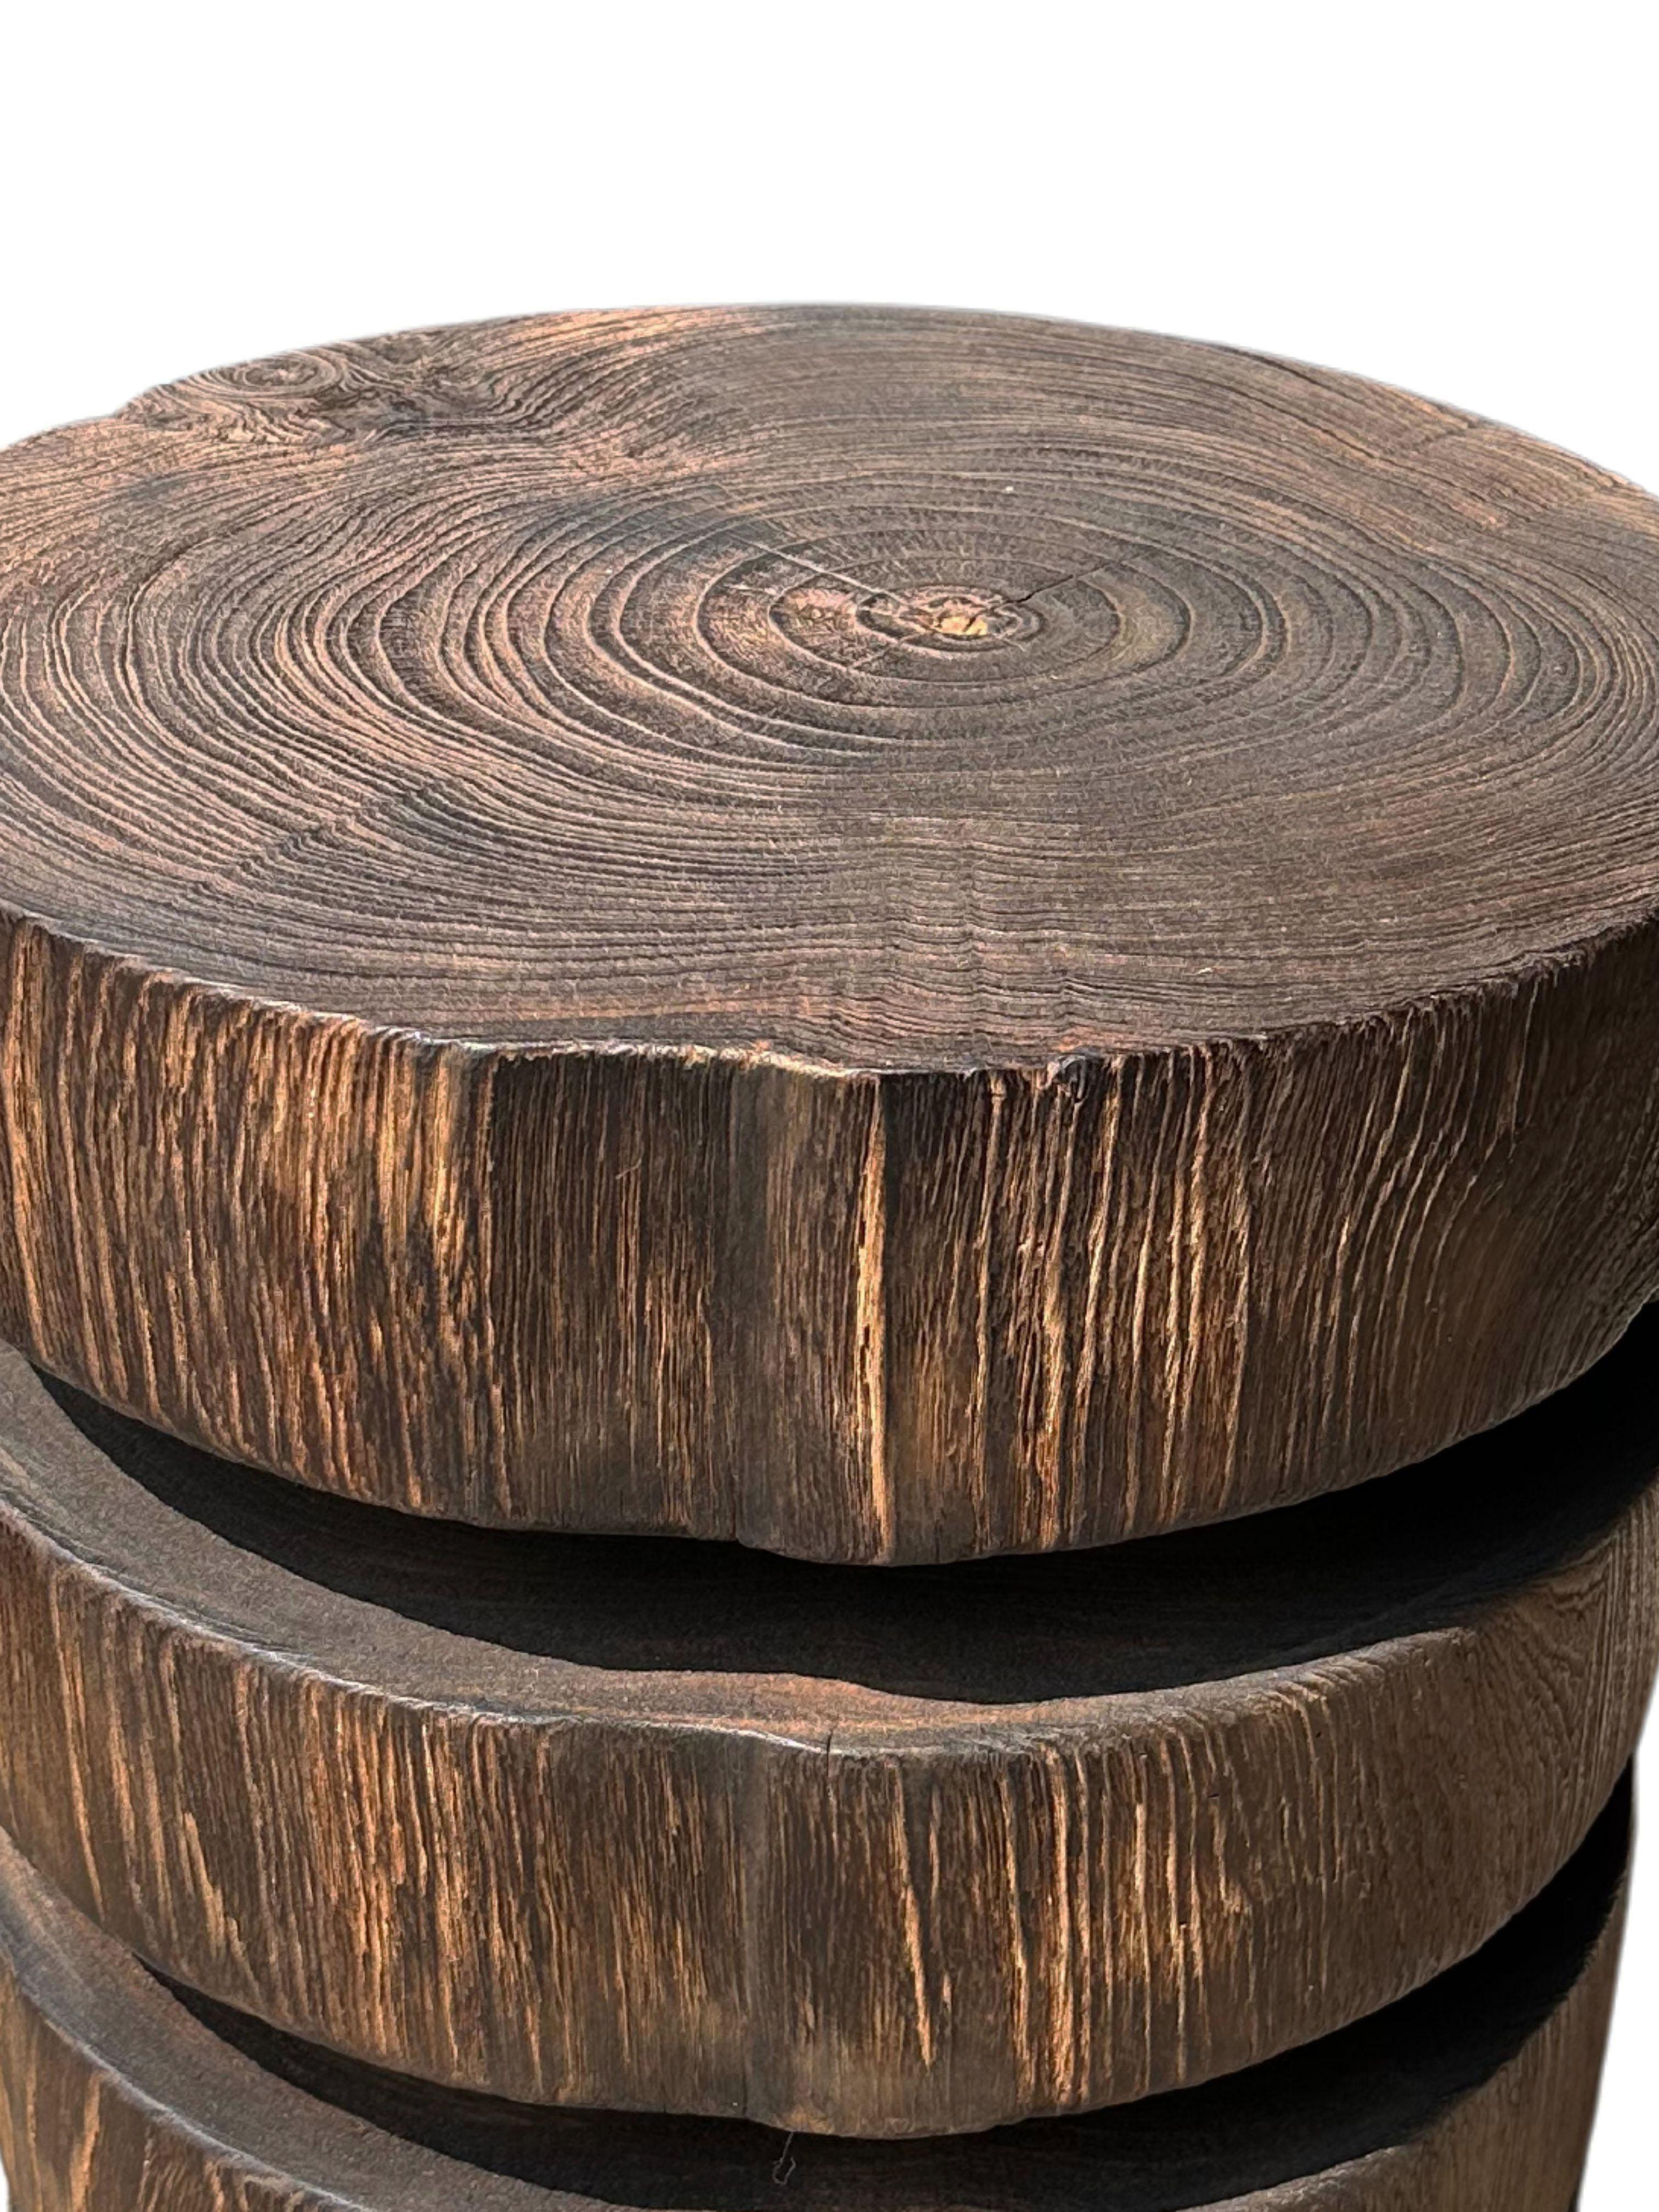 Indonesian Sculptural Round Table Crafted from Solid Suar Wood Stacked Design For Sale